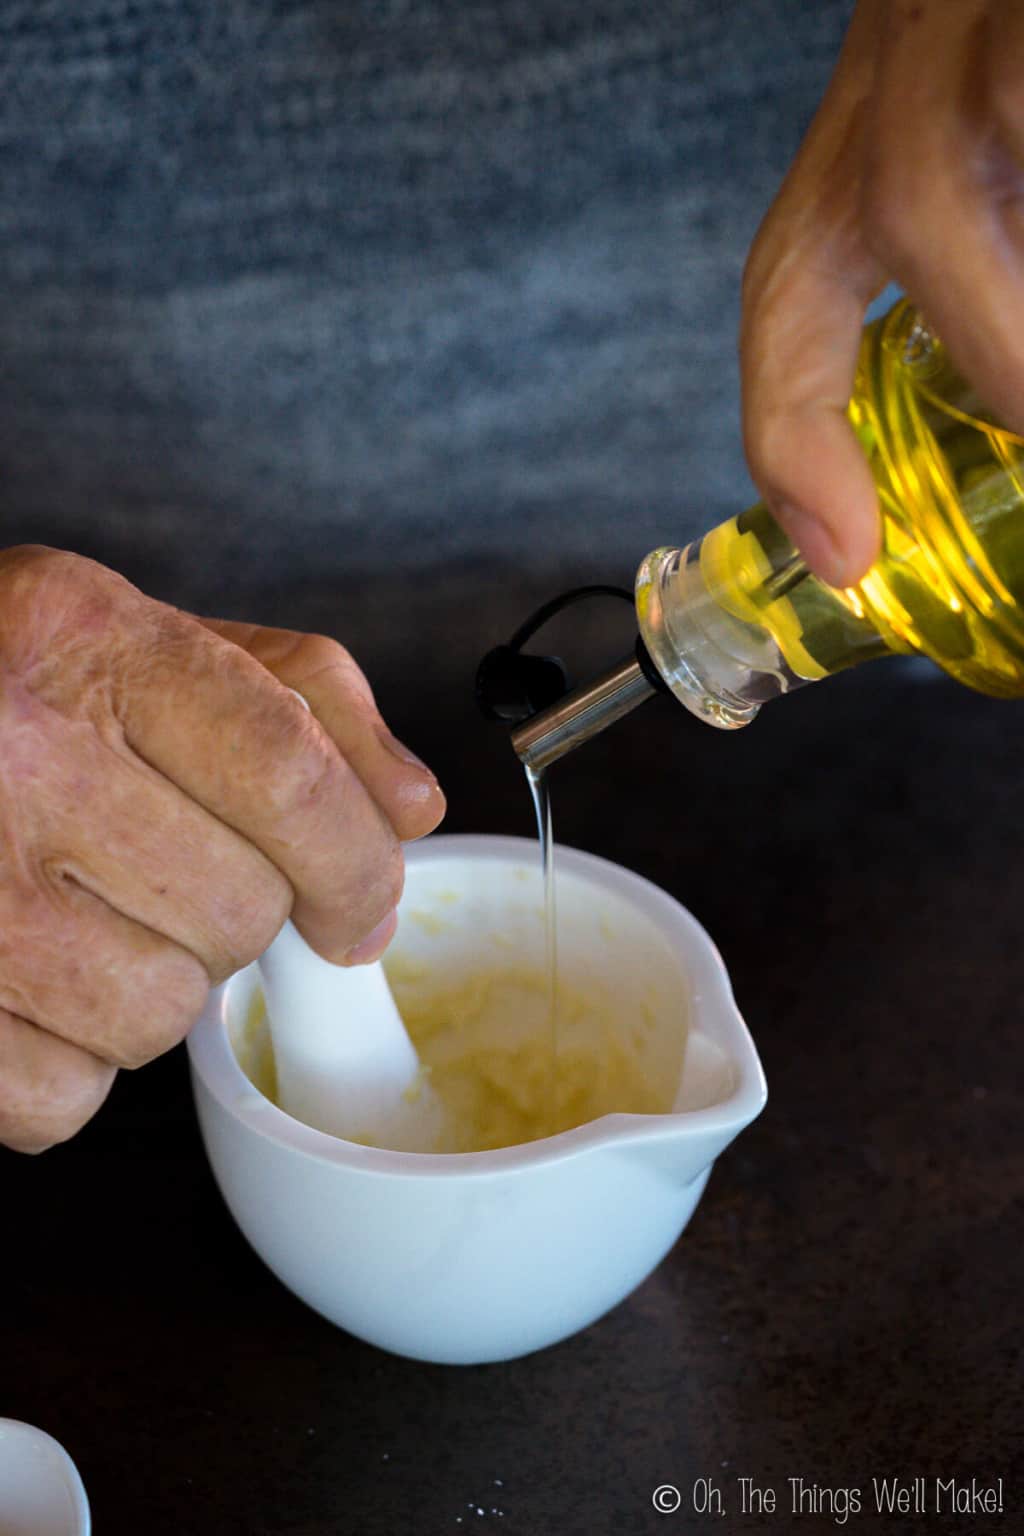 Close up of hands making traditional aioli . One hand holding a pestle grinding aioli, and one hand holding a bottle of olive oil pouring it into the aioli mixture in the white mortar.